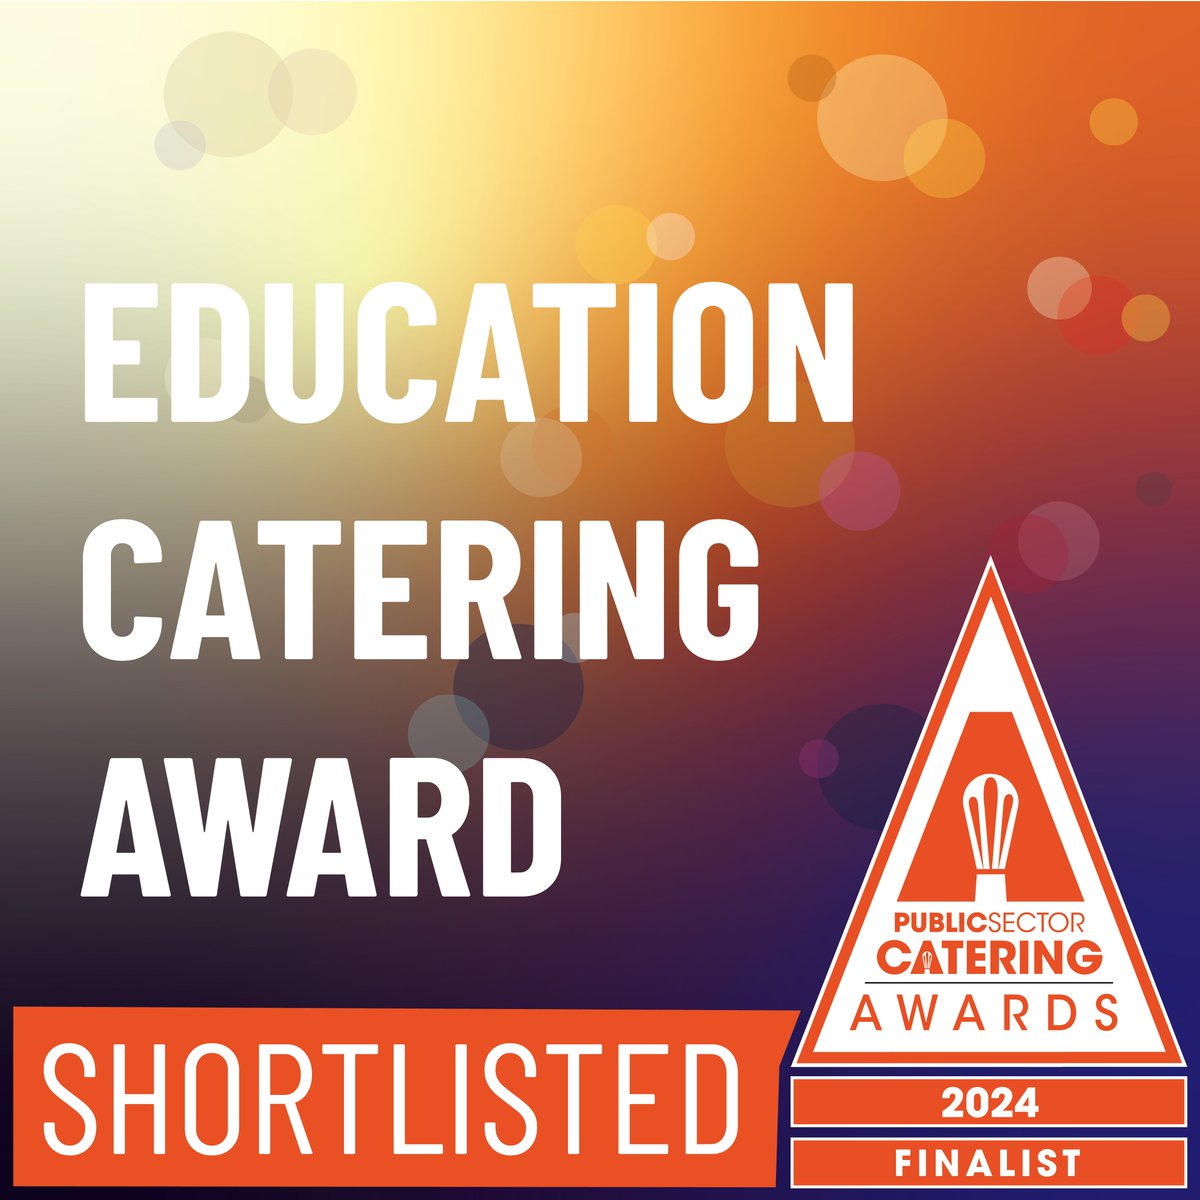 We are delighted to announce that we have been recognised for our school catering; being shortlisted for @PSCMagazine Education Catering Award! We cater to 149 schools over London and beyond. This is a huge credit to our school chefs. We look forward to the awards night soon🤞🏻